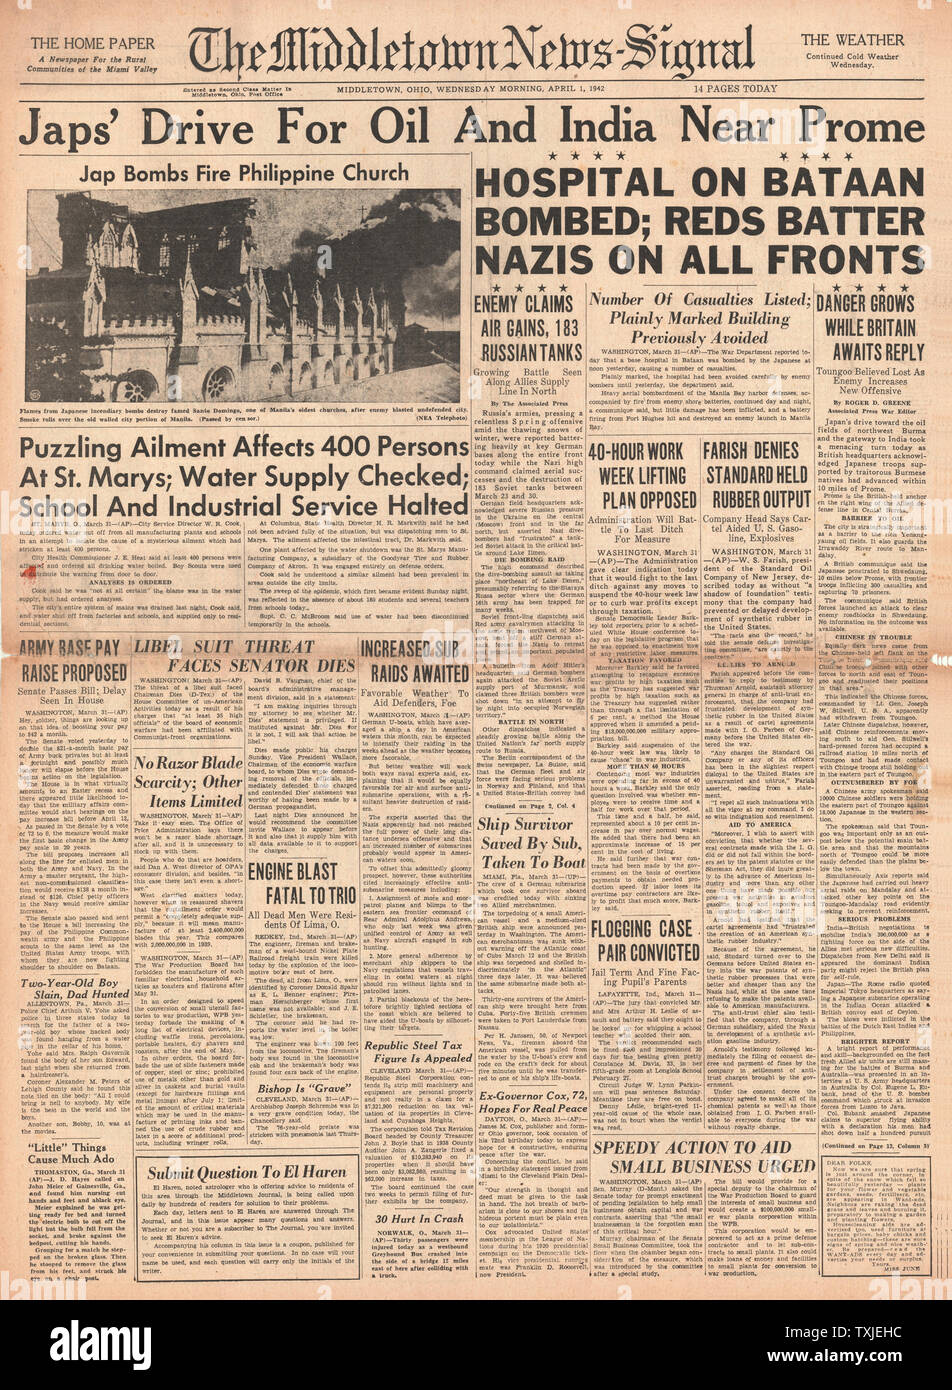 1942 front page Middletown News Signal Japanese Forces advance on Burmese Oil Fields at Prome and India Stock Photo